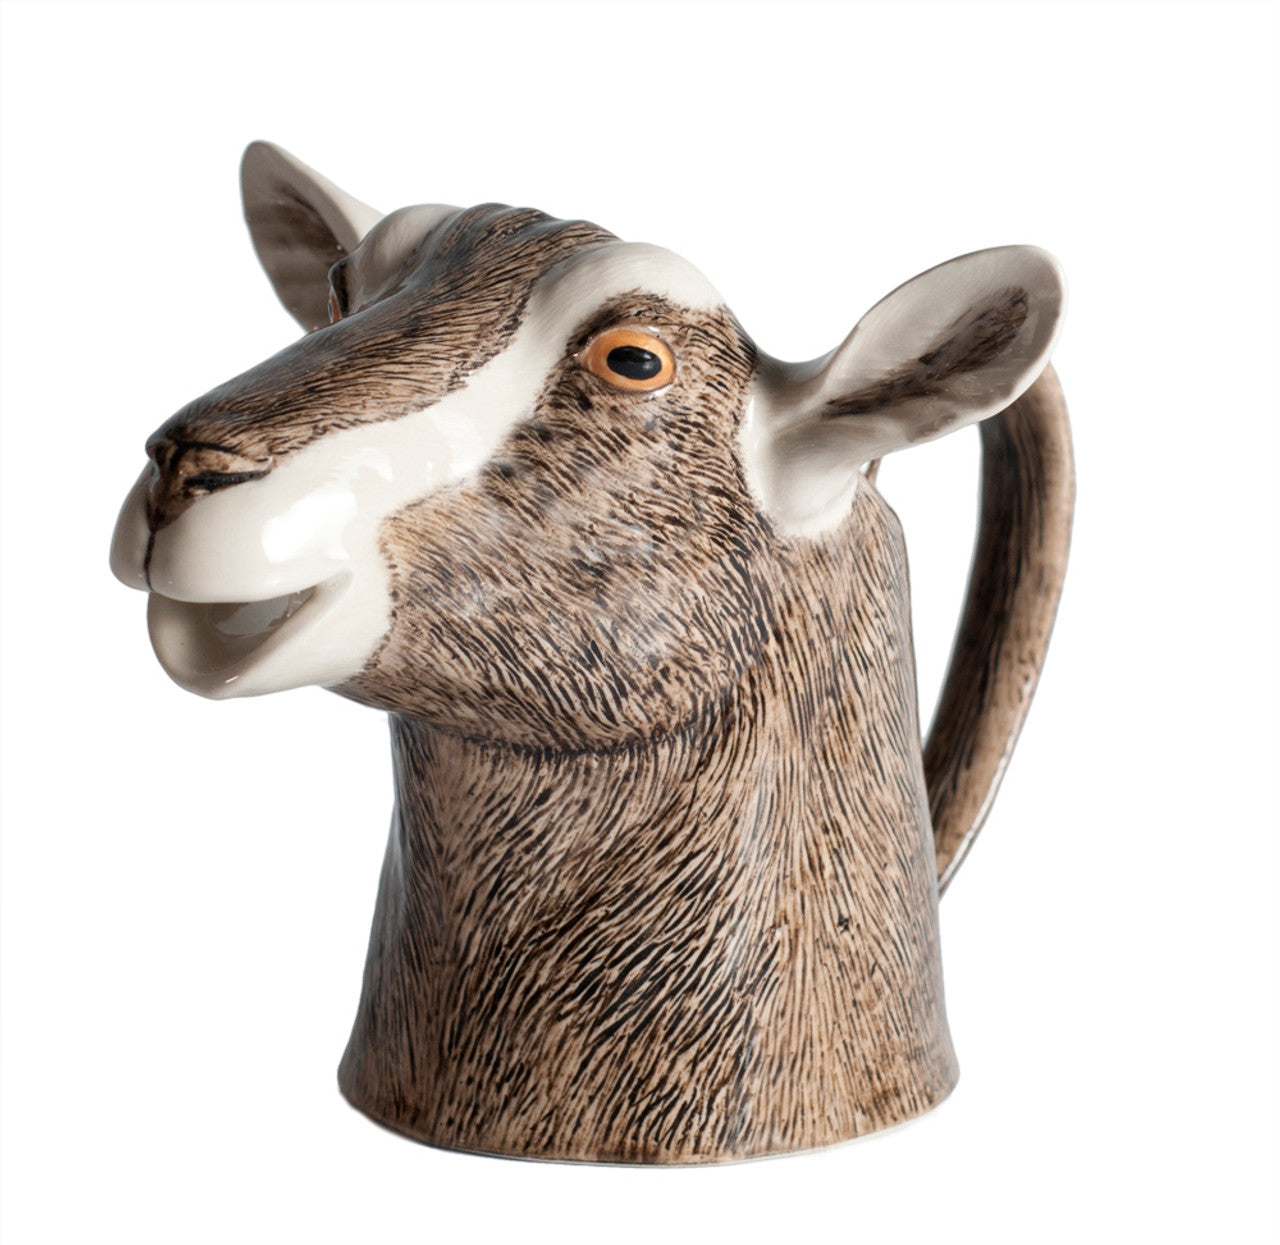 A Woodland Animal Jugs by Quail on a white background.